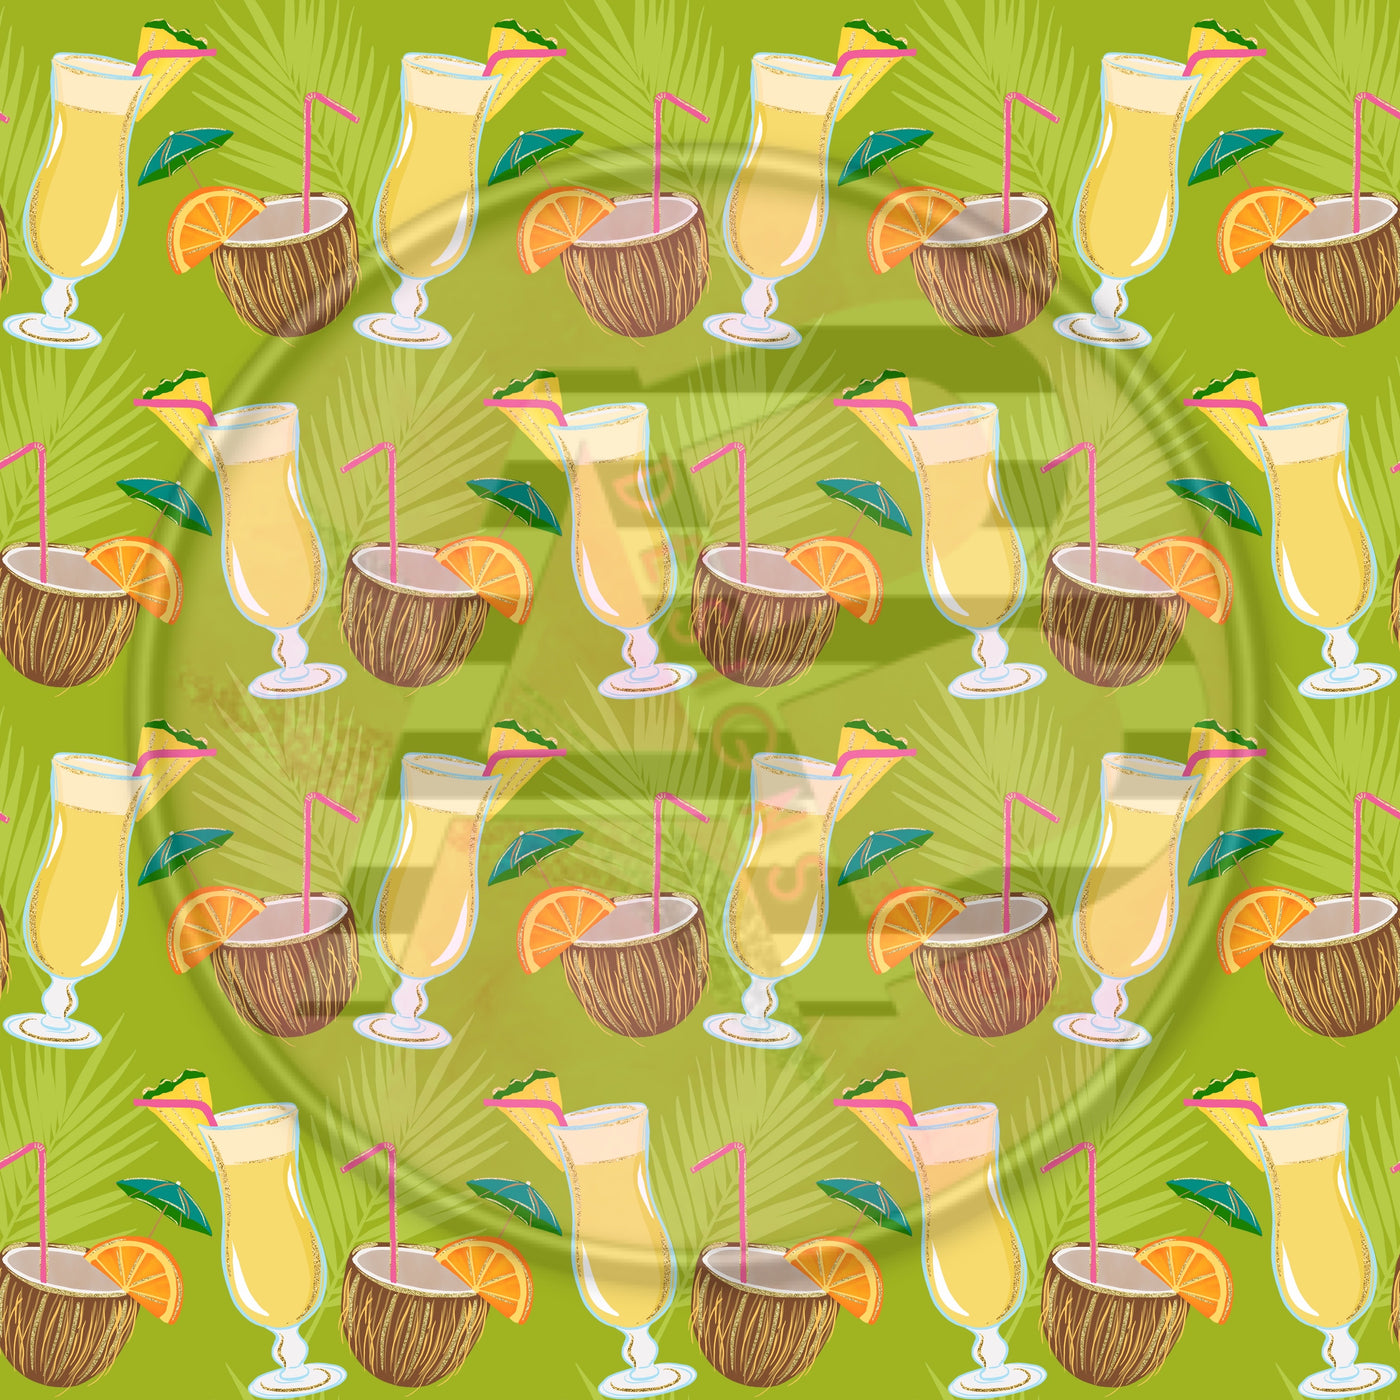 Adhesive Patterned Vinyl - Tropical 928